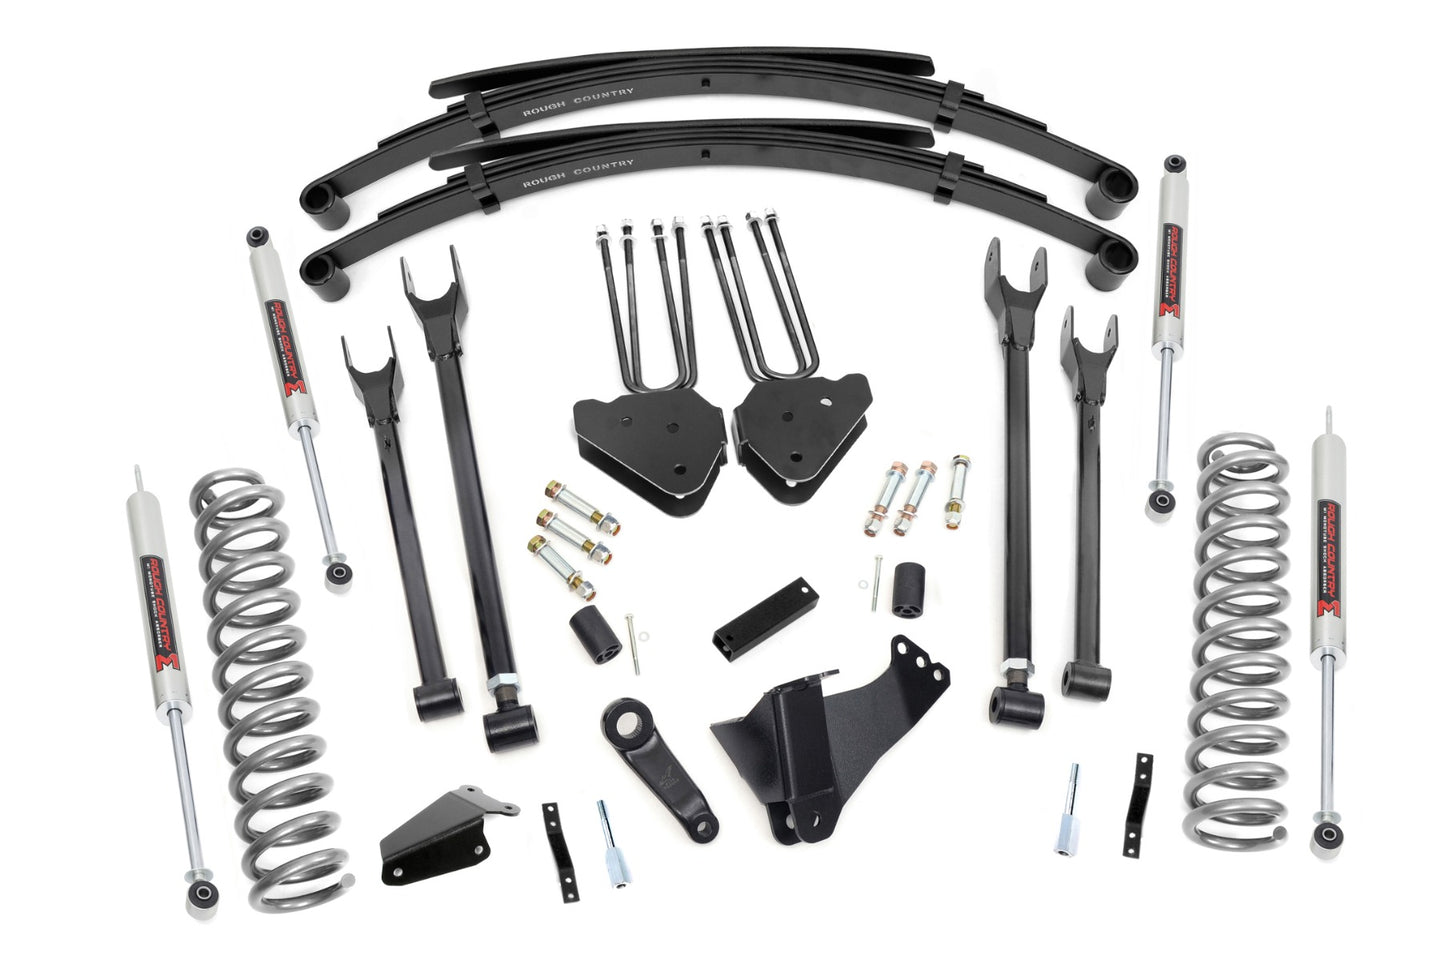 Rough Country (58240) 6 Inch Lift Kit | Diesel | 4 Link | M1 | Ford F-250/F-350 Super Duty (05-07)